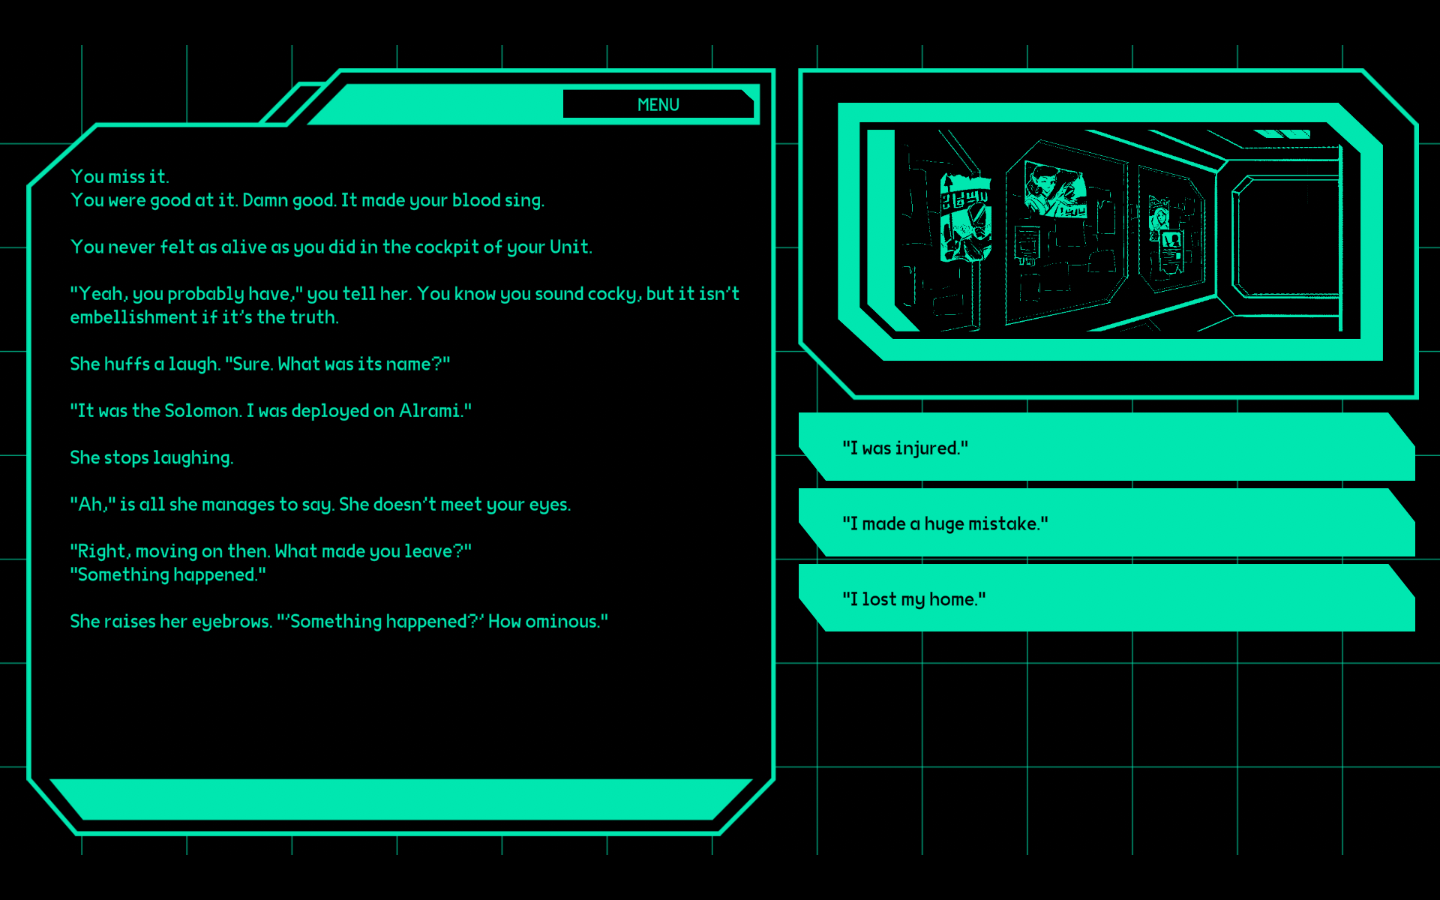 A dialogue screen in That Which Faith Demands. The conversation is about the player character's past